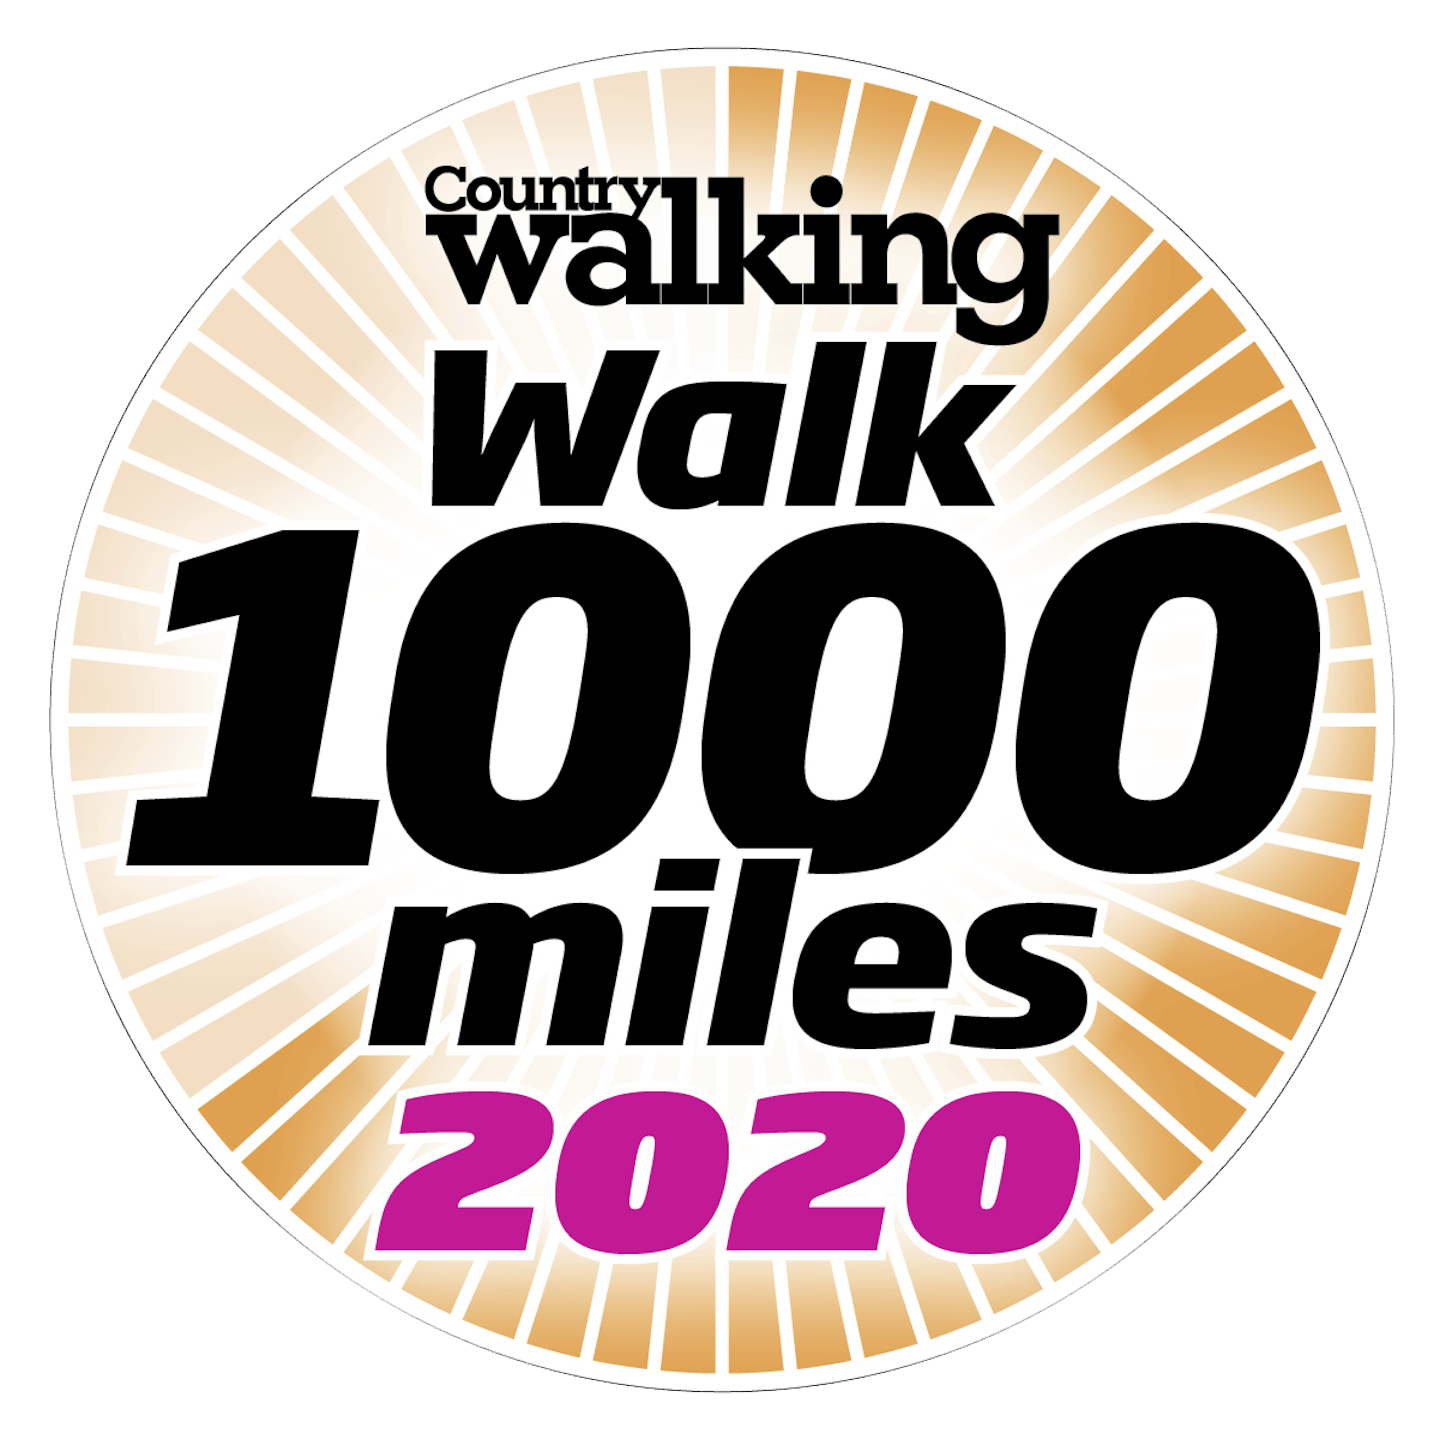 Country Walking's #Walk1000Miles campaign